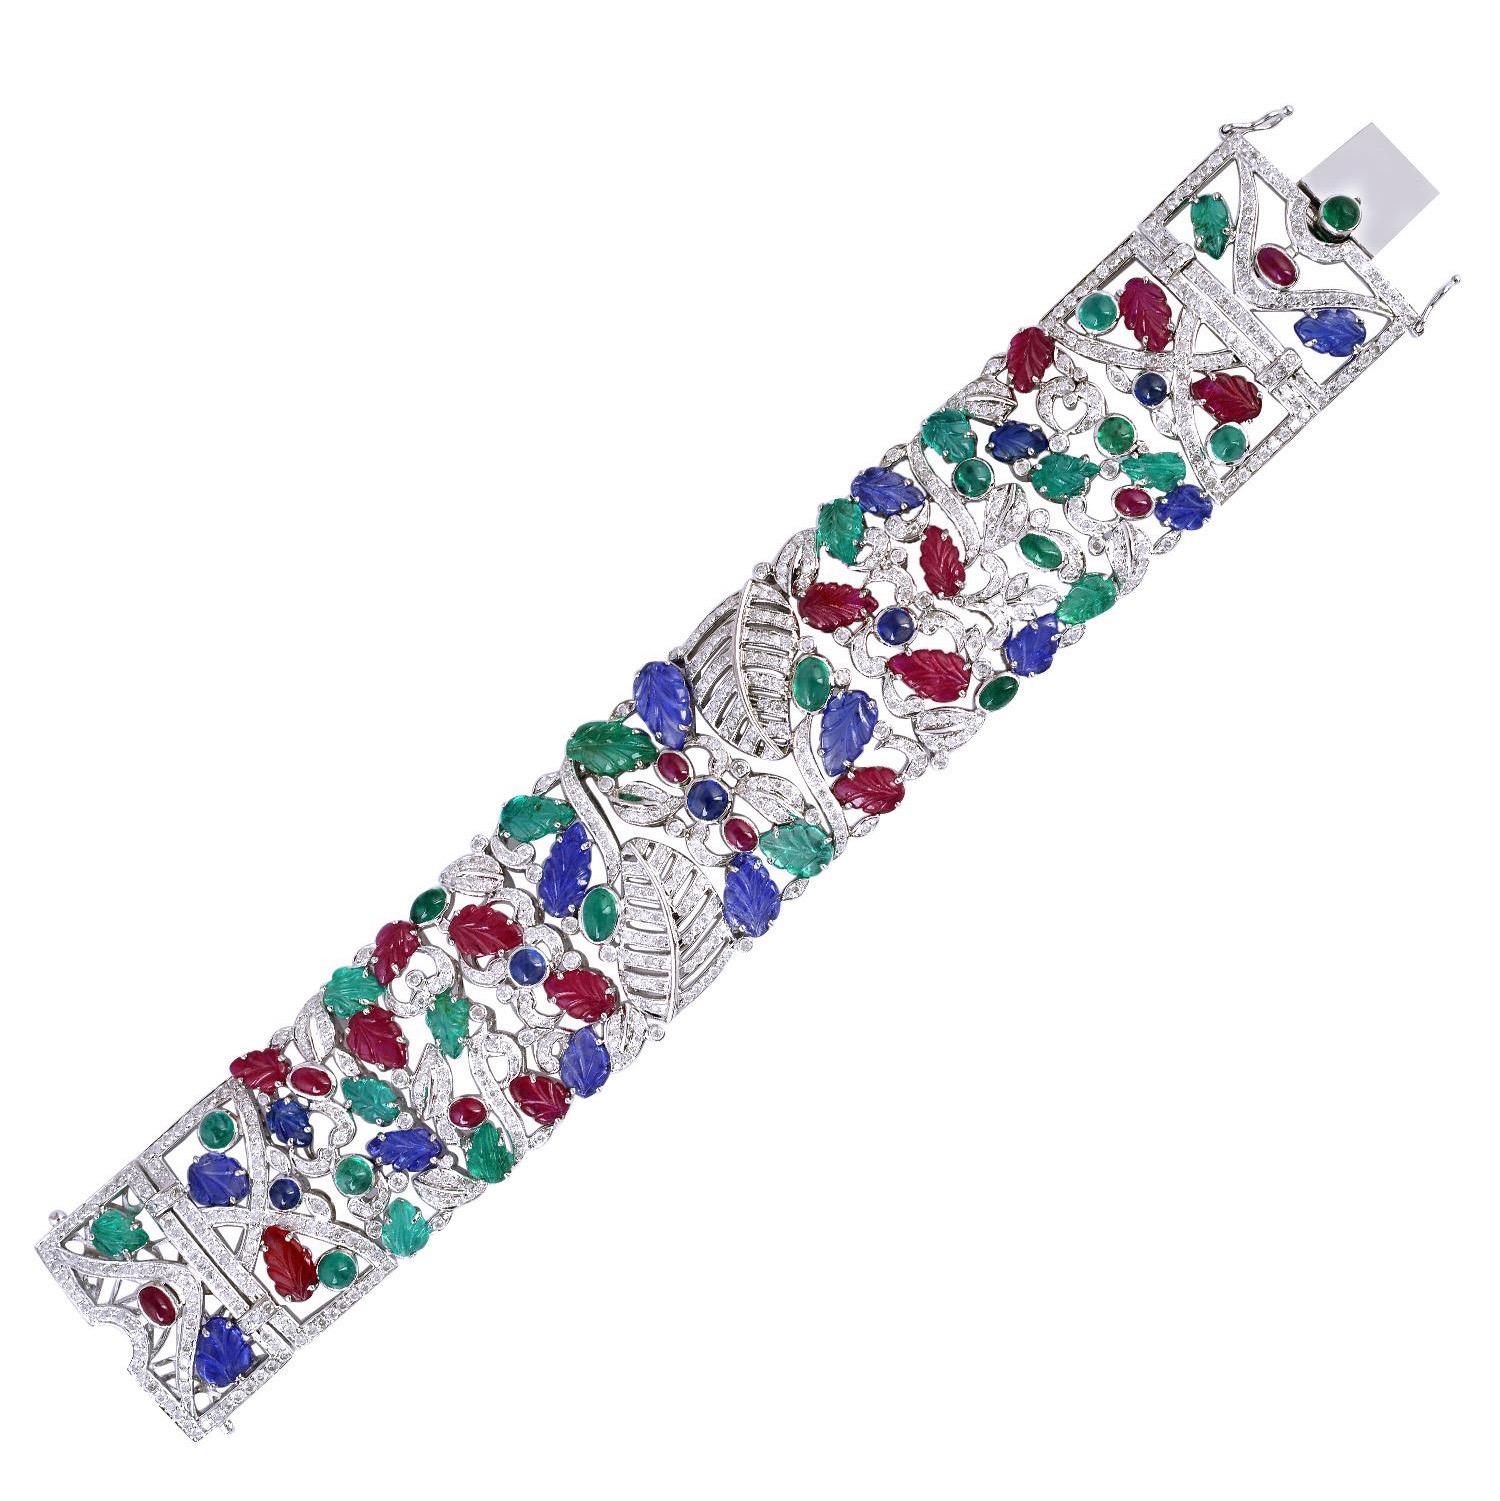 A stunning statement cuff handmade in 14K gold and hand carved leaf motifs set throughout. It is set in 13.07 carats emerald, 12.25 carats ruby, sapphire & 5.9 carats of sparkling diamonds. Clasp Closure

FOLLOW MEGHNA JEWELS storefront to view the